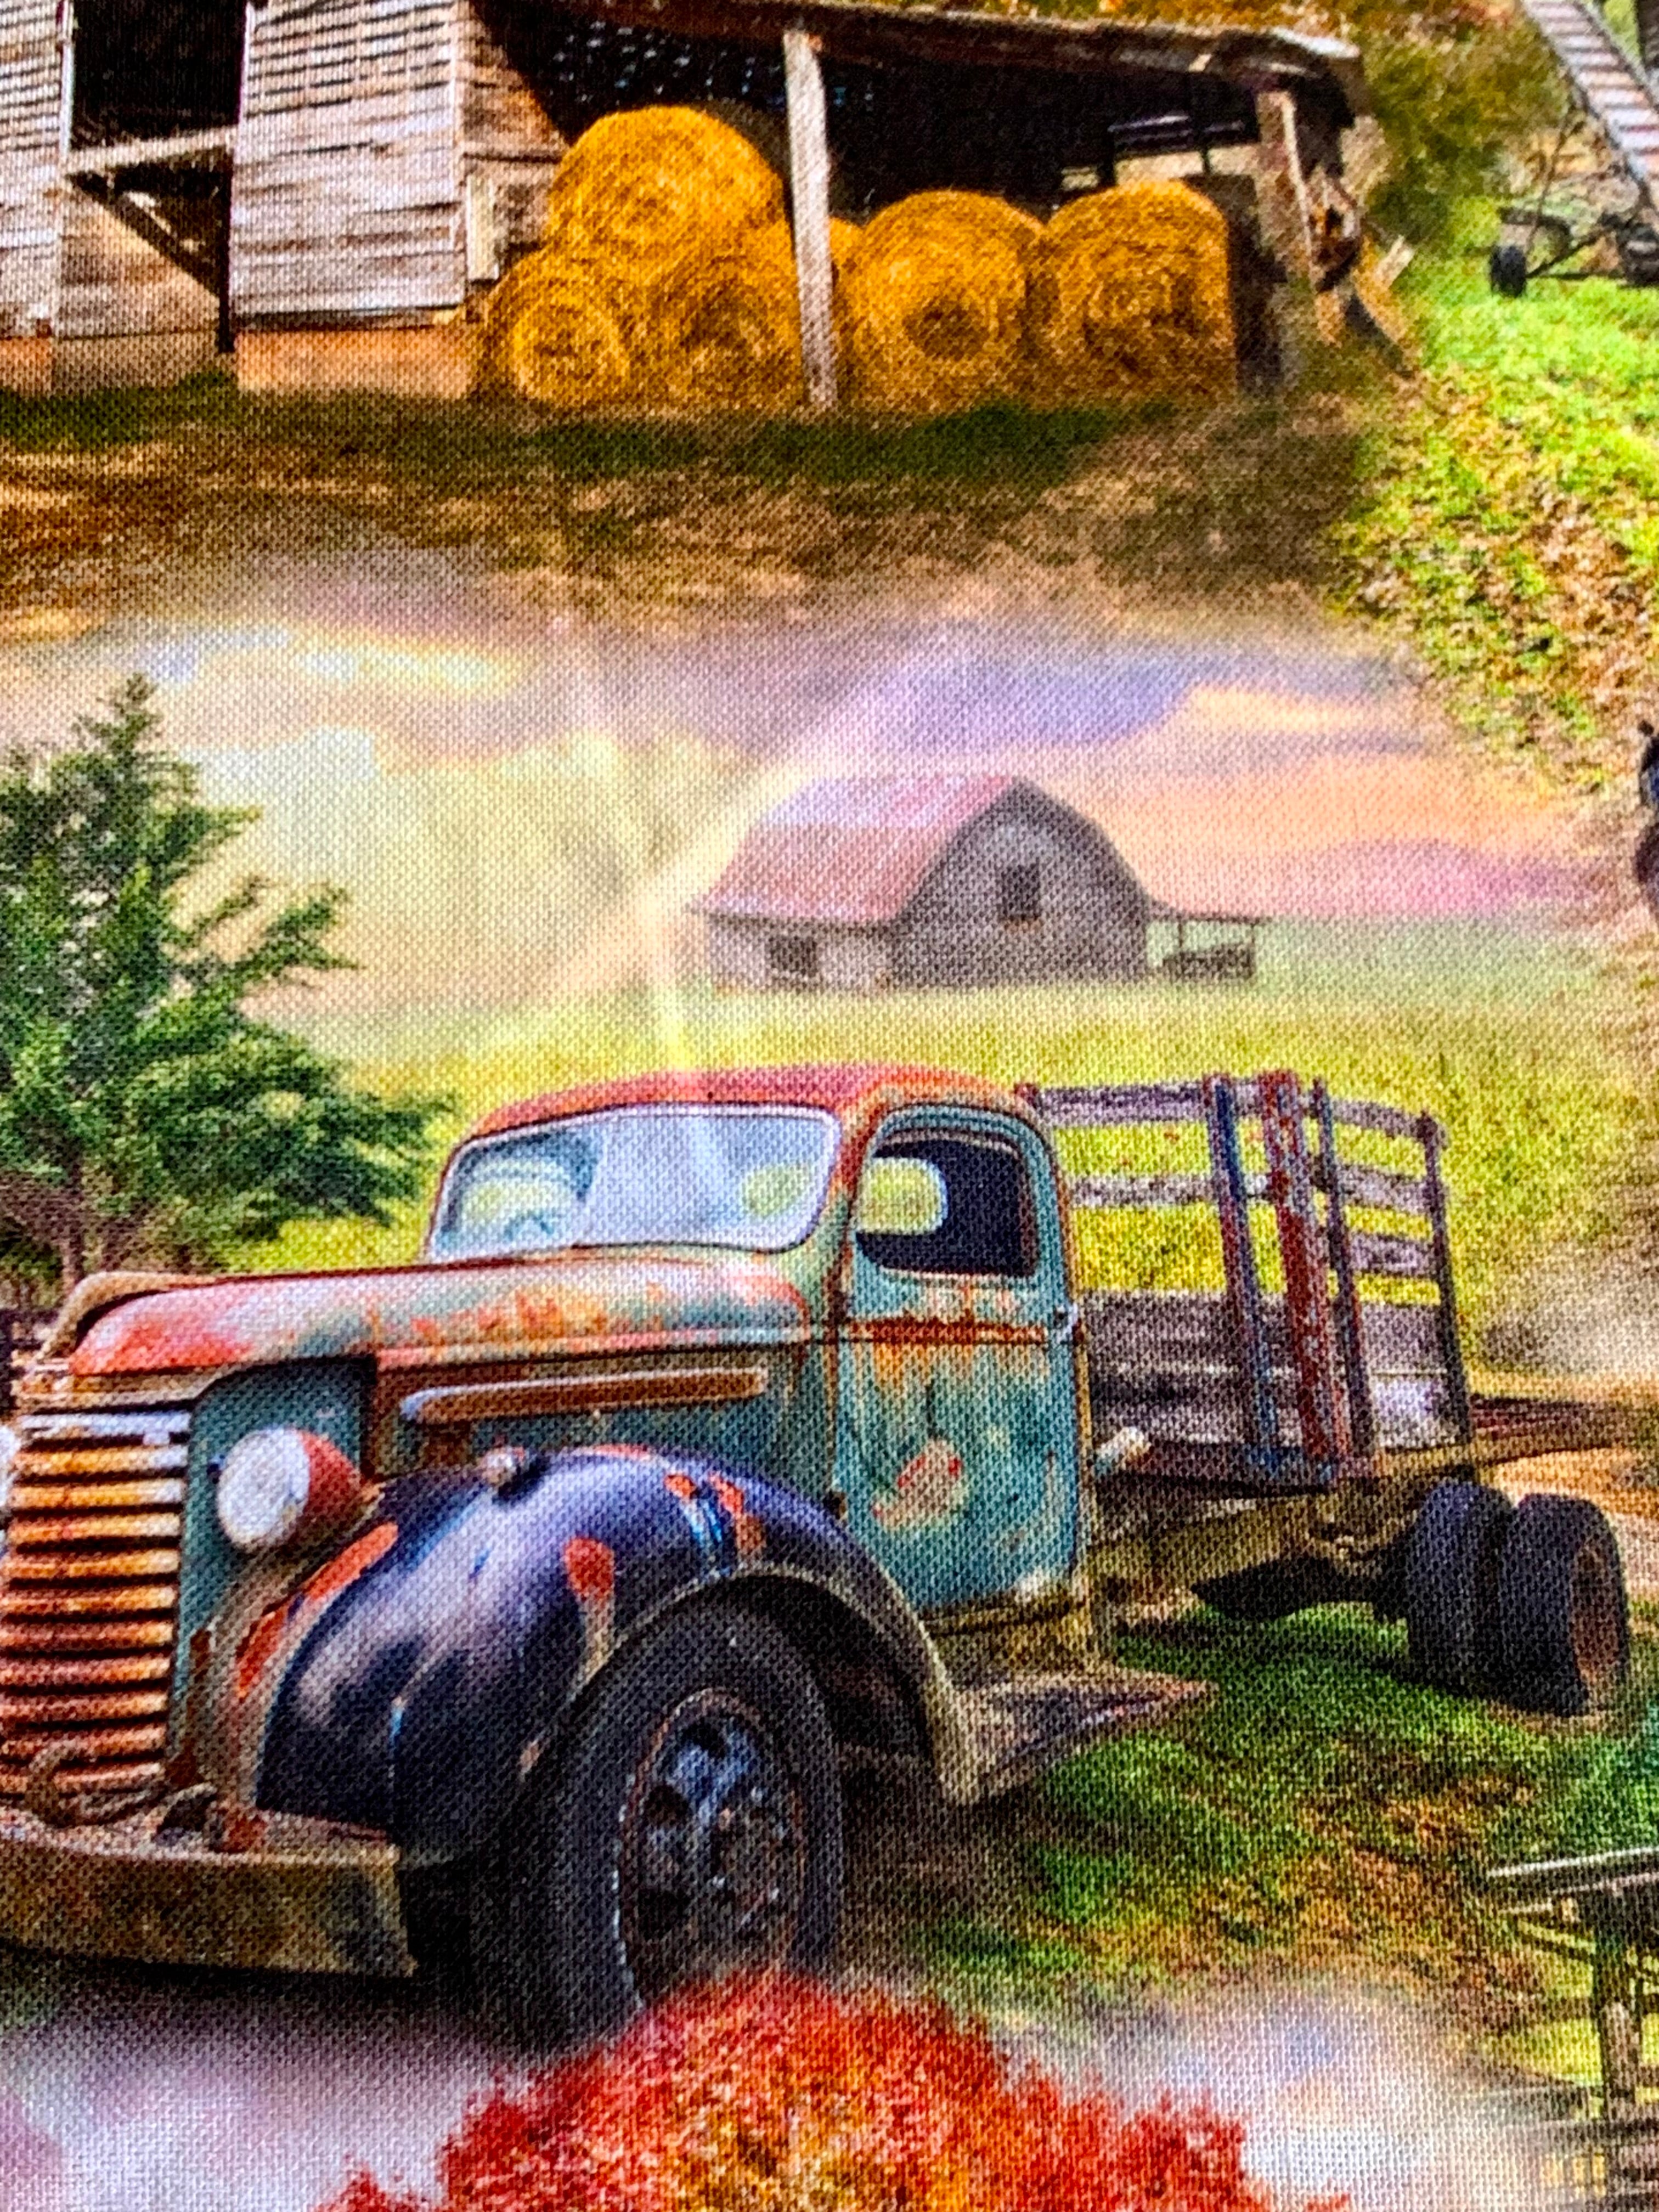 Old Tractors, Barns, and a Farm Truck Cotton Fabric